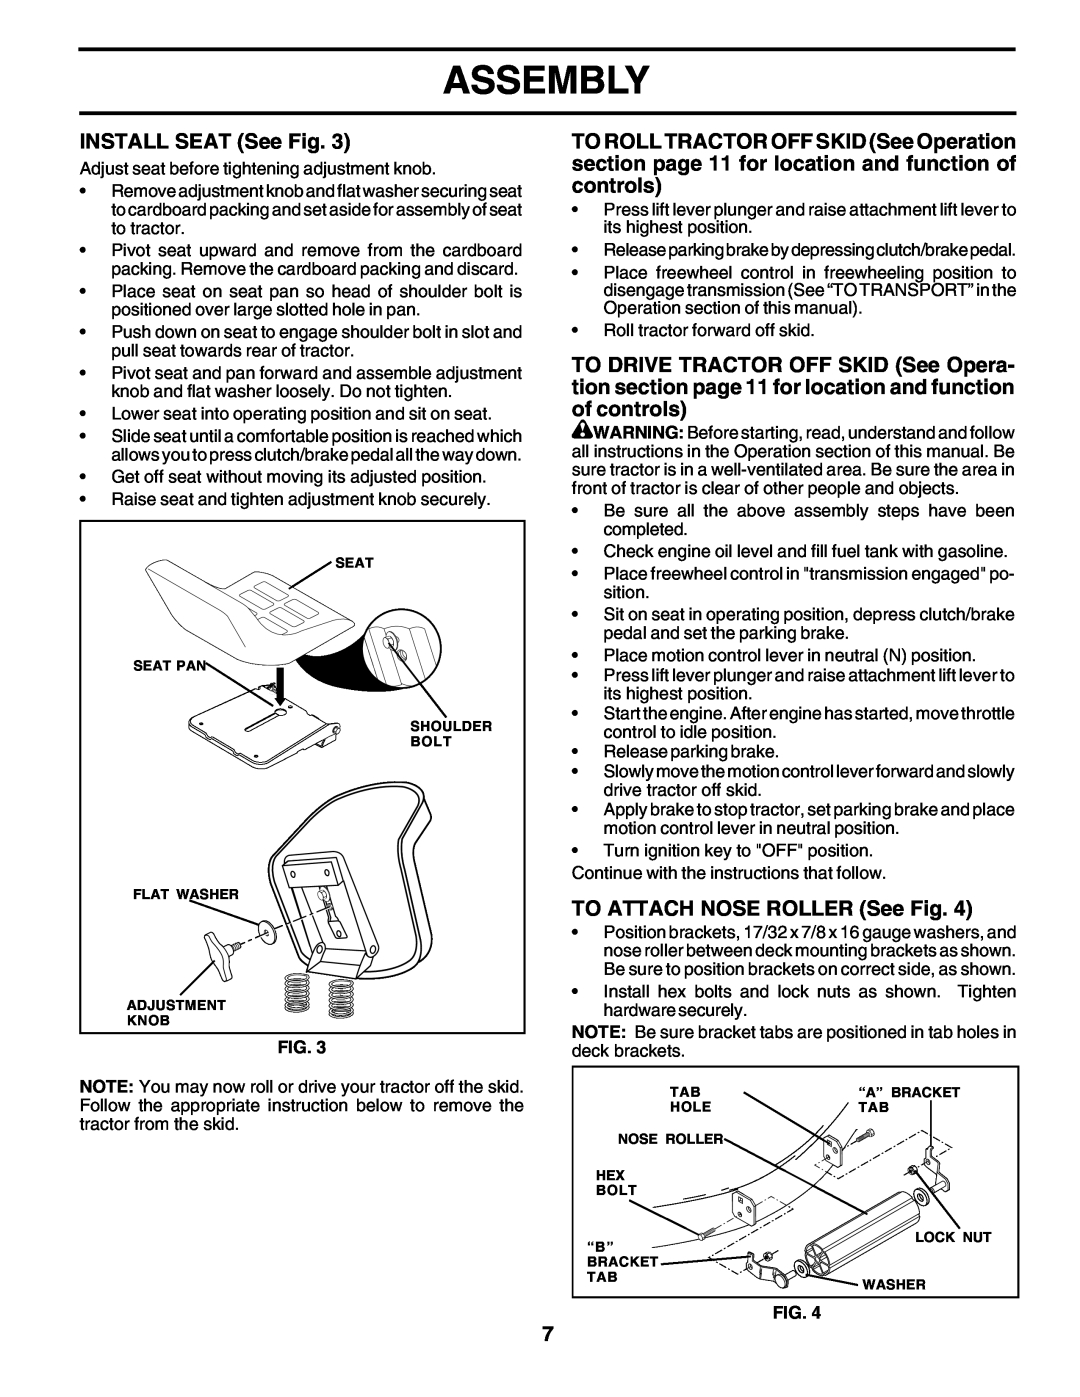 Weed Eater 178387 owner manual Assembly, INSTALL SEAT See Fig, TO ATTACH NOSE ROLLER See Fig 